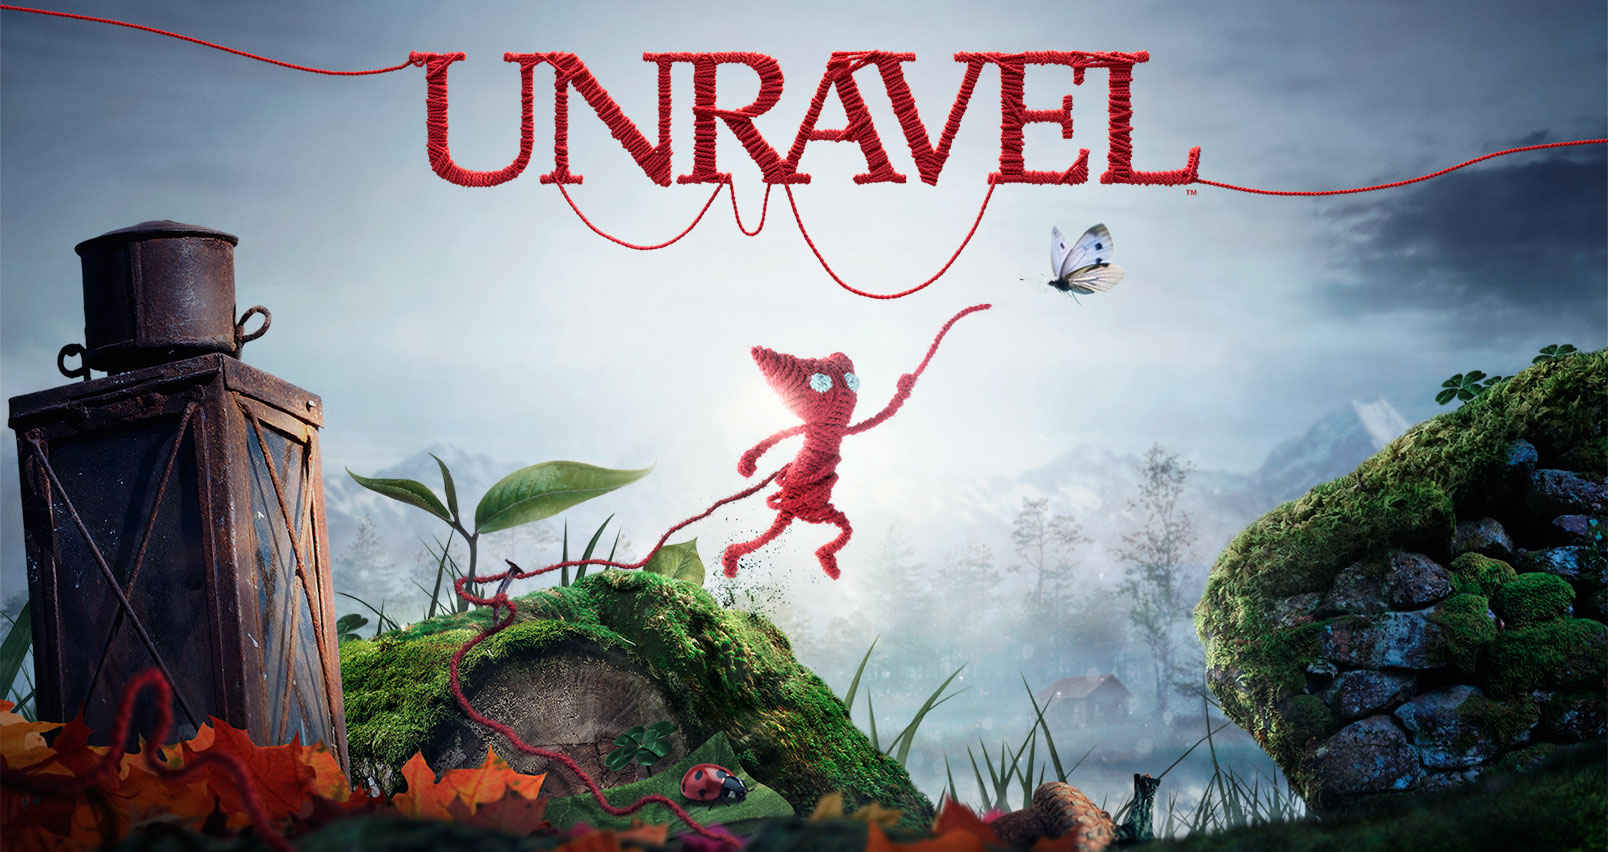 Unravel Animated Wallpaper 01 by Jimking on DeviantArt